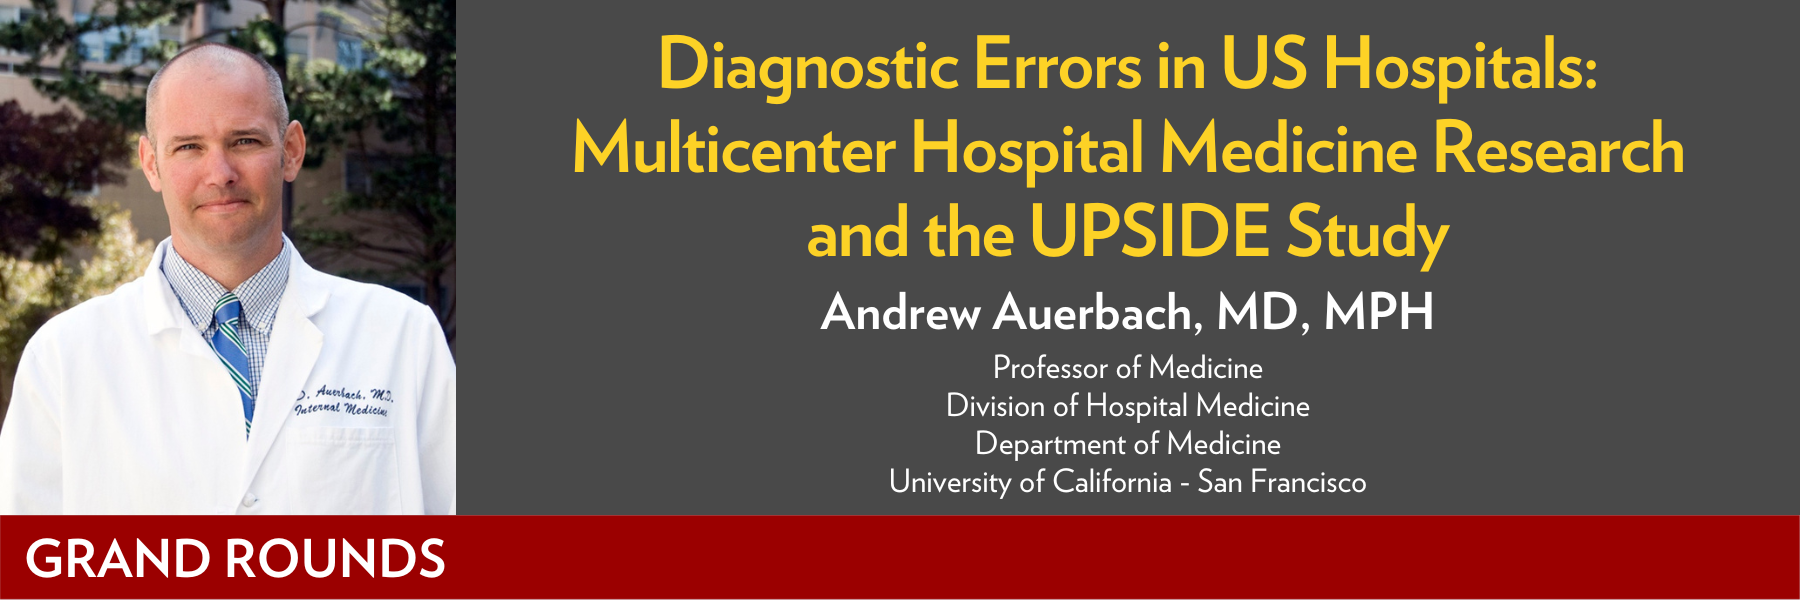 Presentation title: Diagnostic Errors in US Hospitals: Multicenter Hospital Medicine Research and the UPSIDE Study